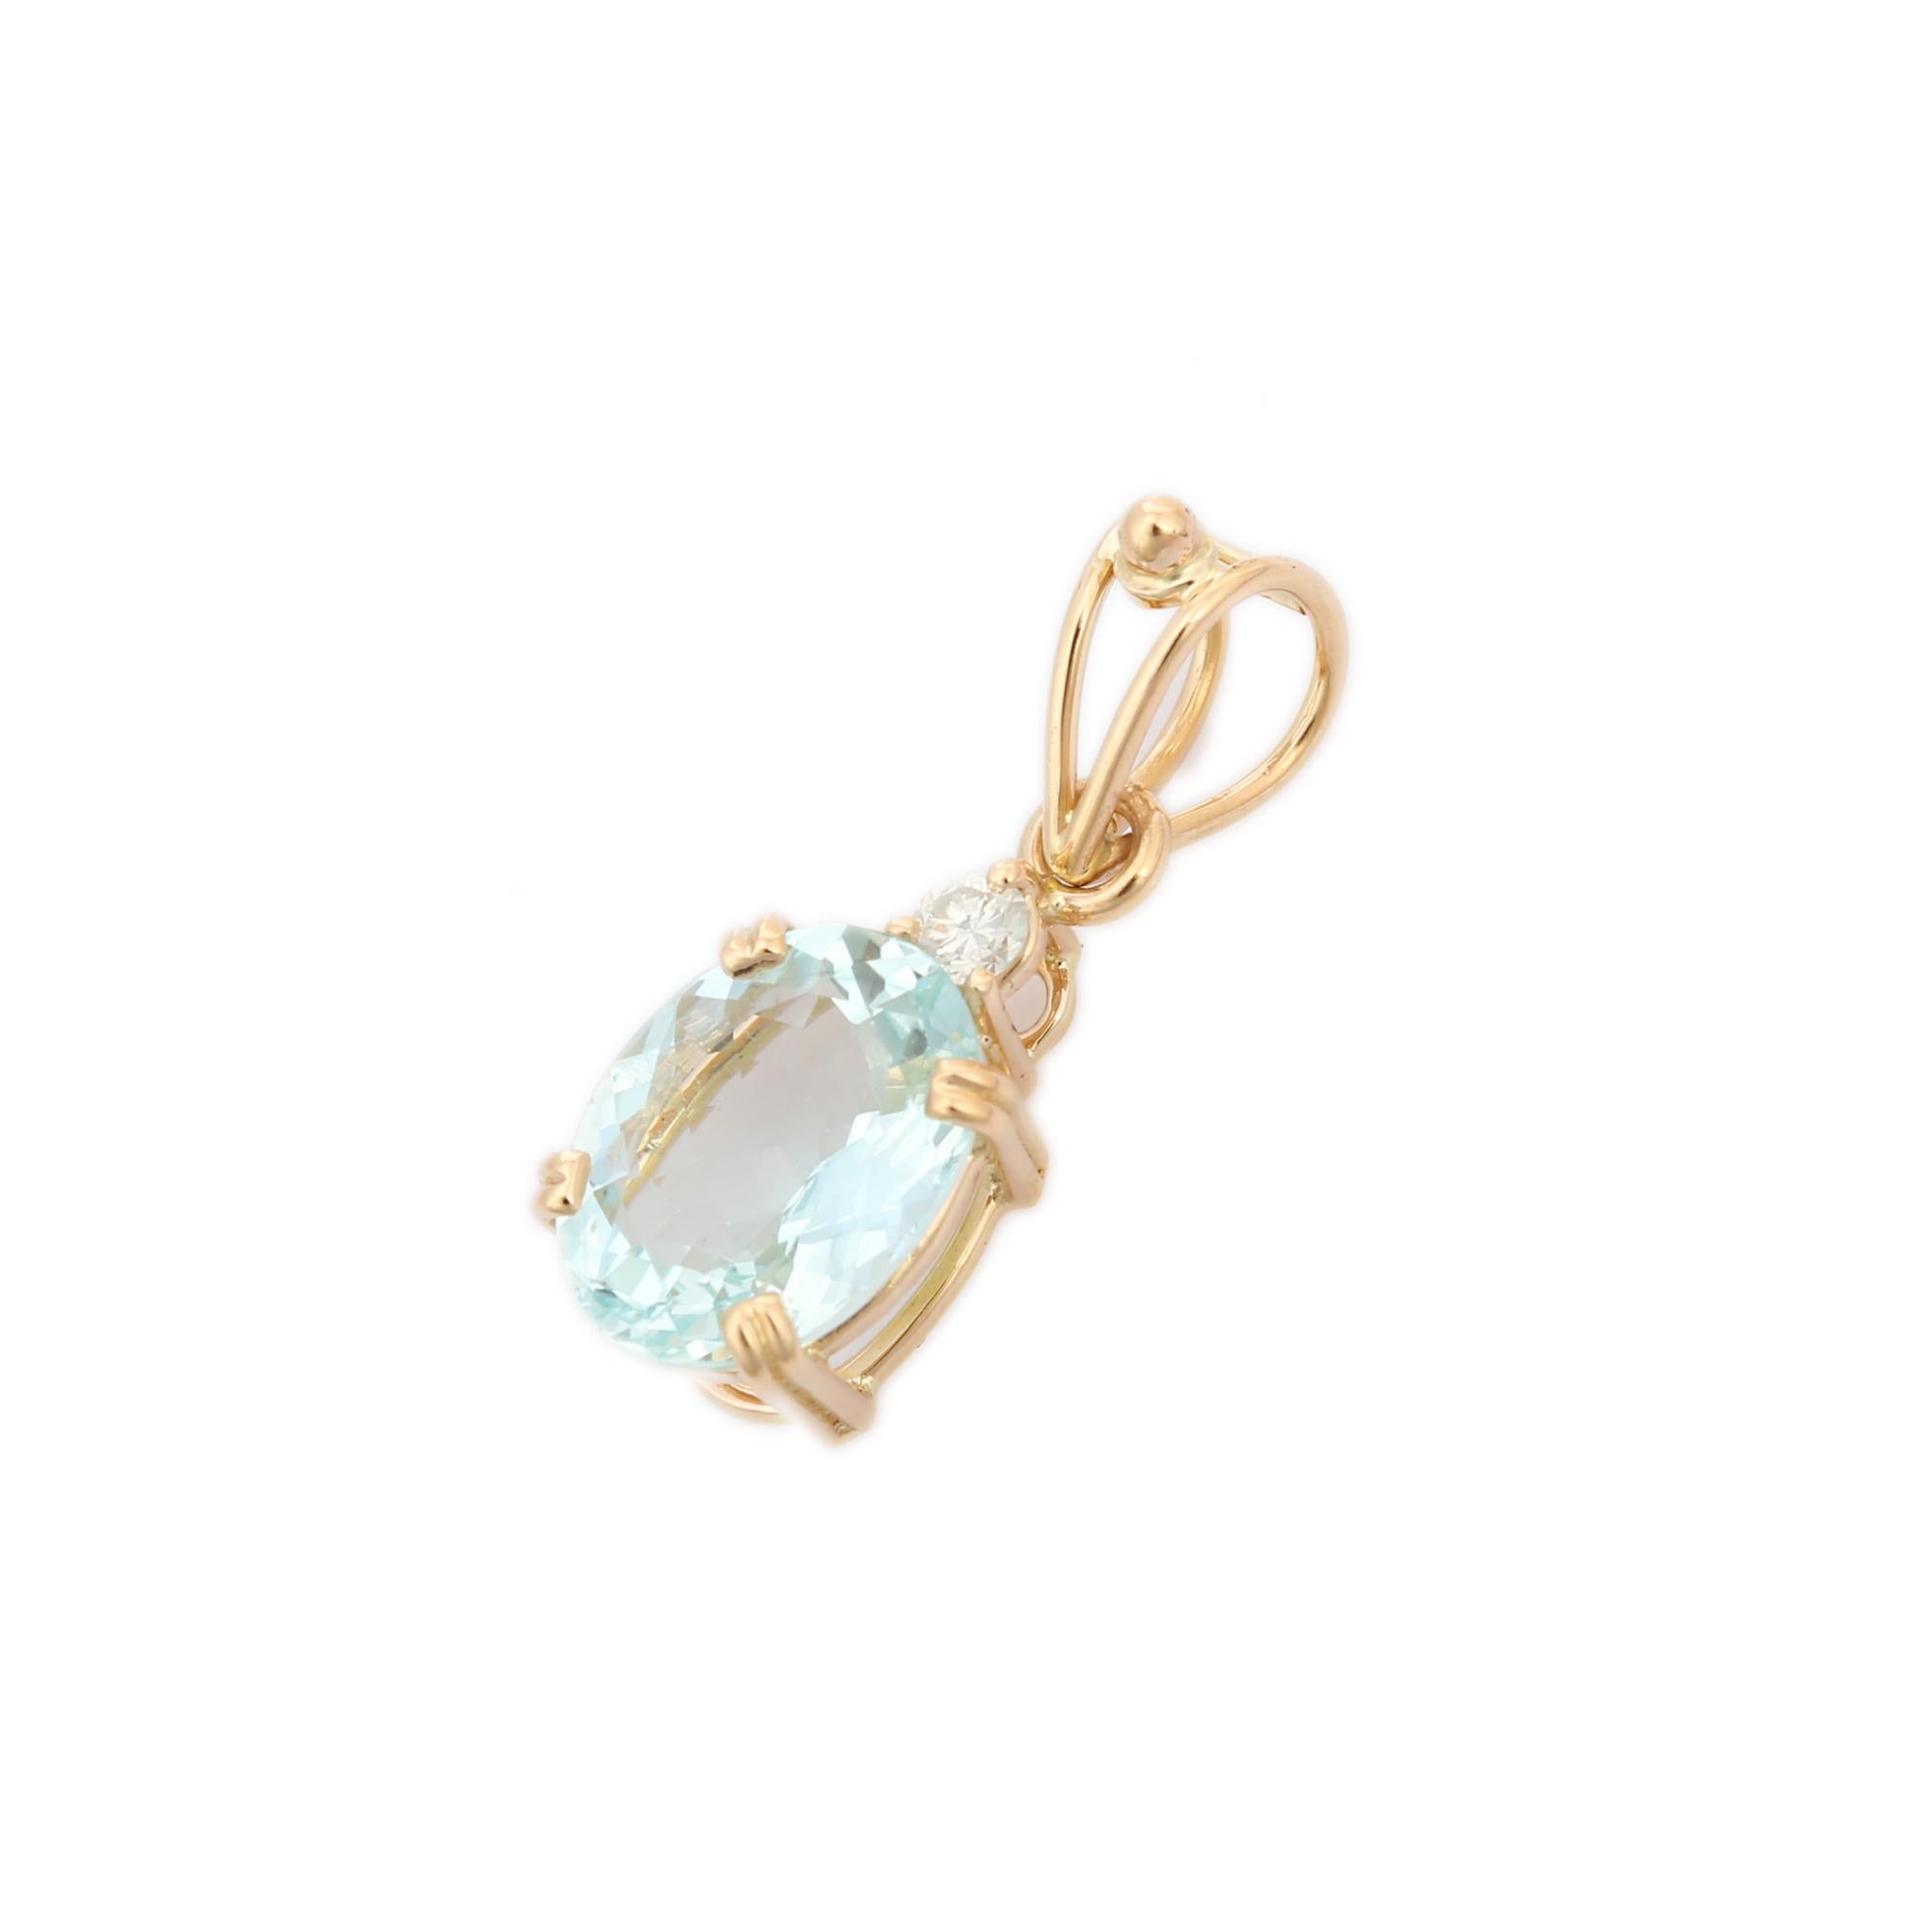 Aquamarine Diamond Pendant in 18K Gold oval cut aquamarine and round cut diamond studded in gold. This stunning piece of jewelry instantly elevates a casual look or dressy outfit. 
Aquamarine is useful for moving through transition and change.